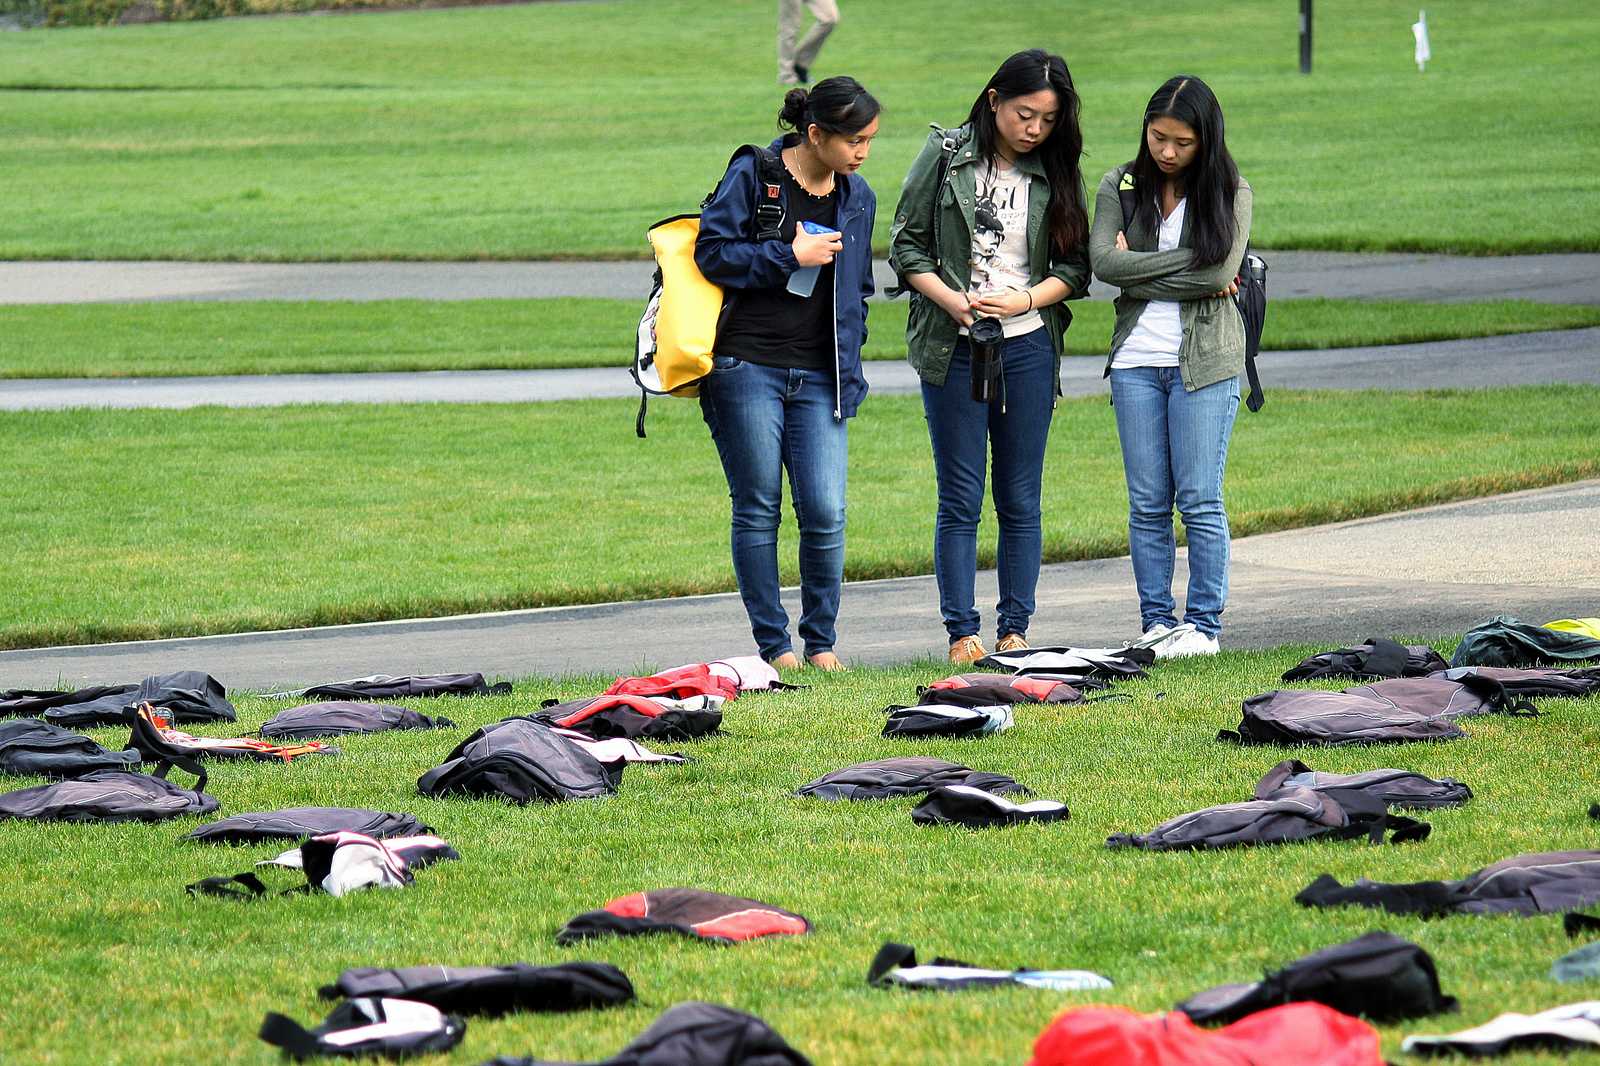 Sophomore nursing students Monique Obiniana (left), Michelle Young (center) and Ashley Chan (right) read a story about one of the 1,100 backpacks placed on the lawn in the Quad which signify the number of students who commit suicide each year. The installation was part of SF State's first suicide prevention conference Friday, Oct. 18, 2013. Photo by Tony Santos / Xpress